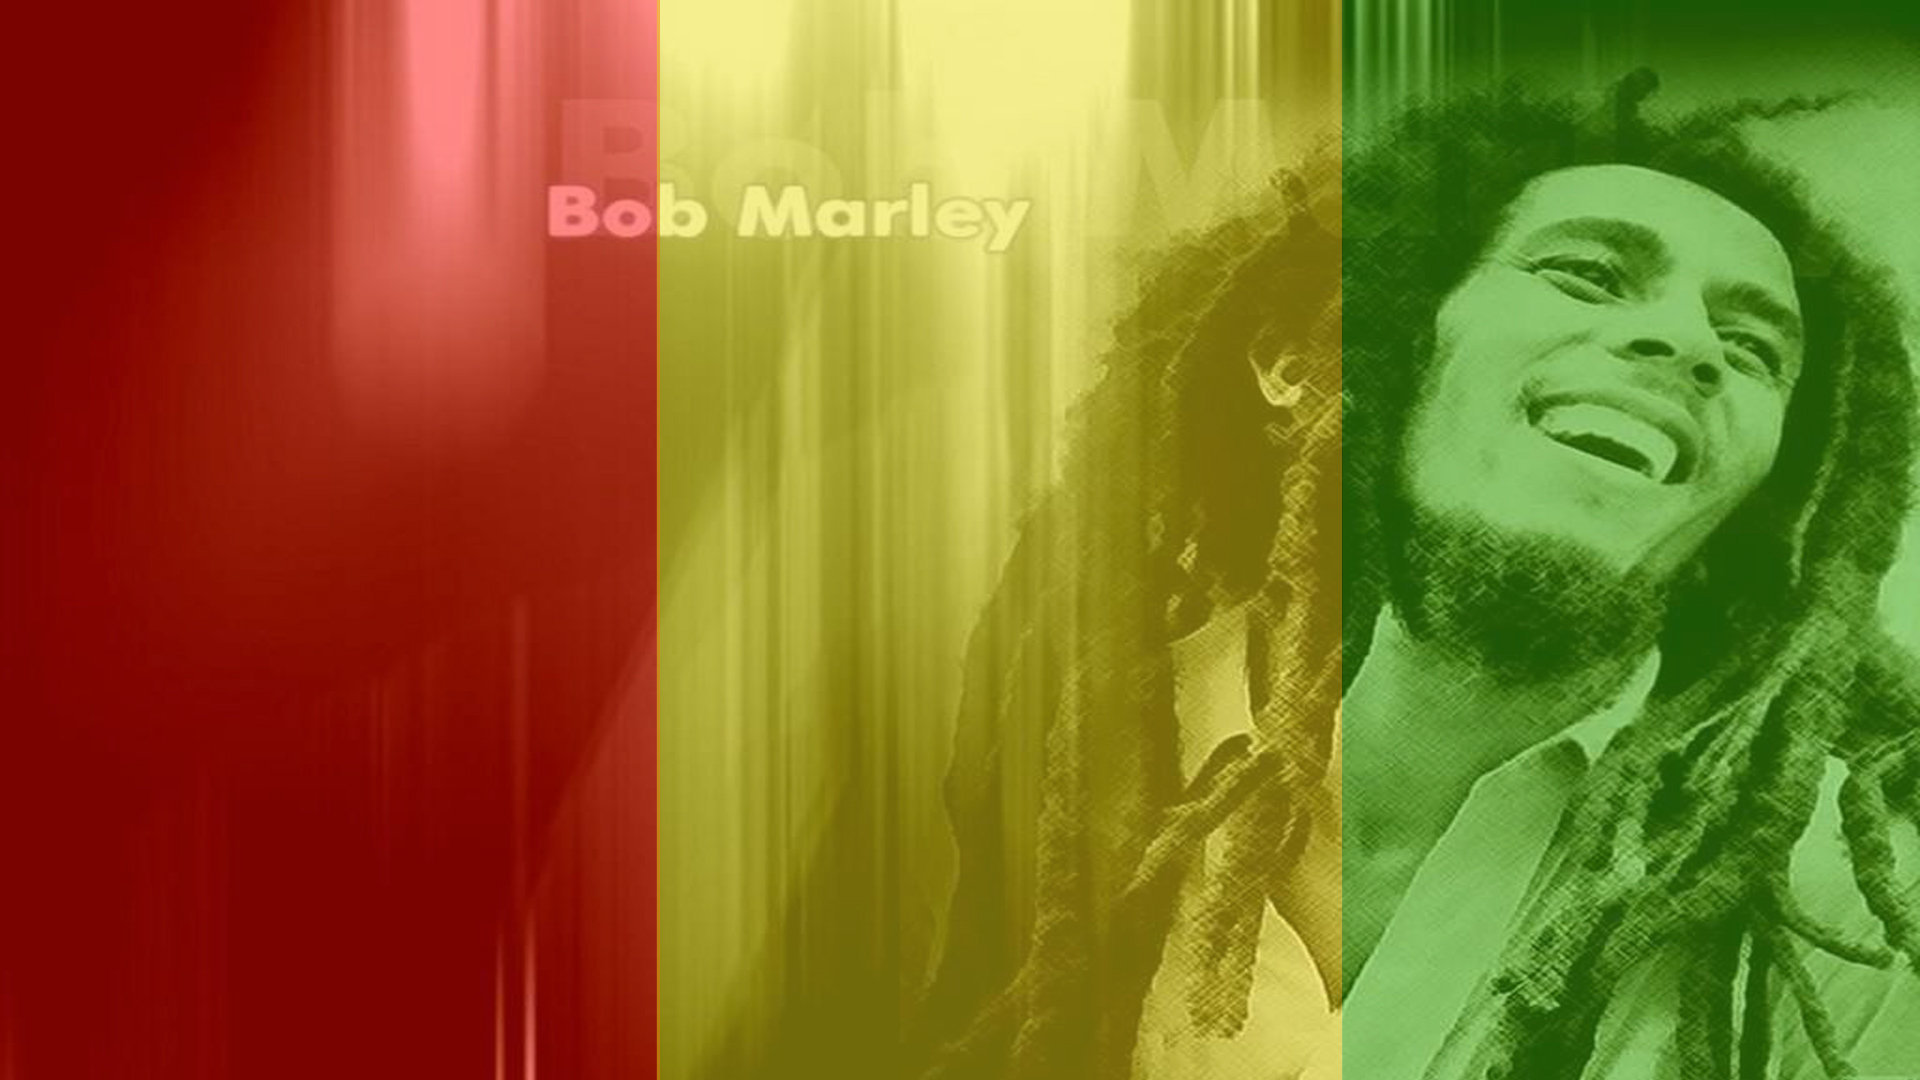 Bob Marley Quote  High Definition High Resolution HD Wallpapers  High  Definition High Resolution HD Wallpapers